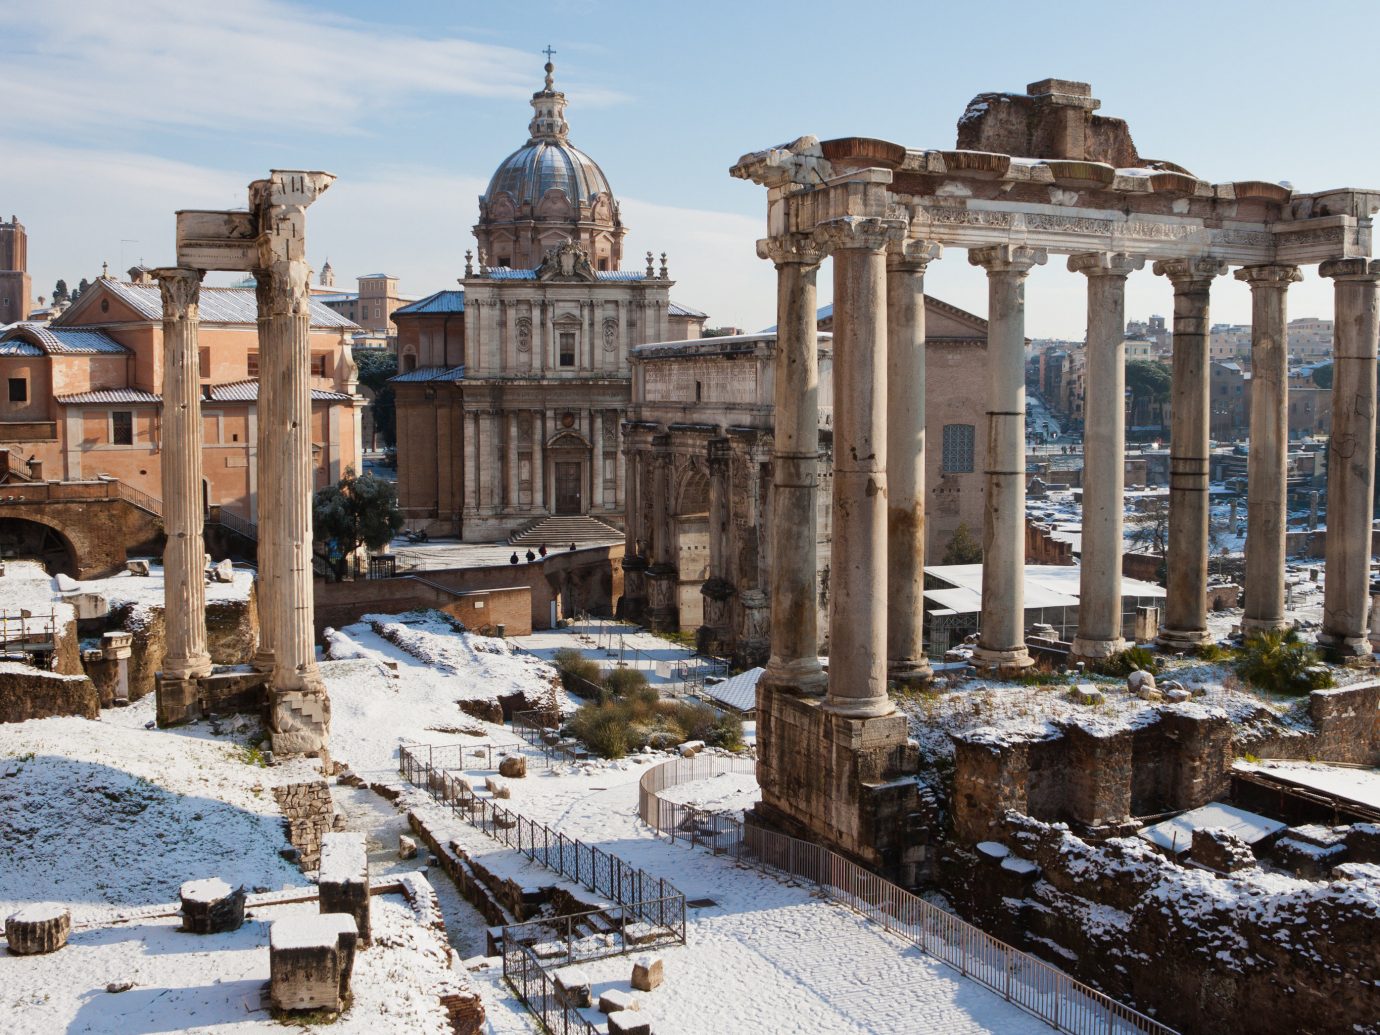 Boutique Hotels Romance Trip Ideas outdoor snow building ancient history Ruins ancient rome ancient roman architecture history historic site archaeological site Winter City tourist attraction sky plaza column facade ruin day colonnade